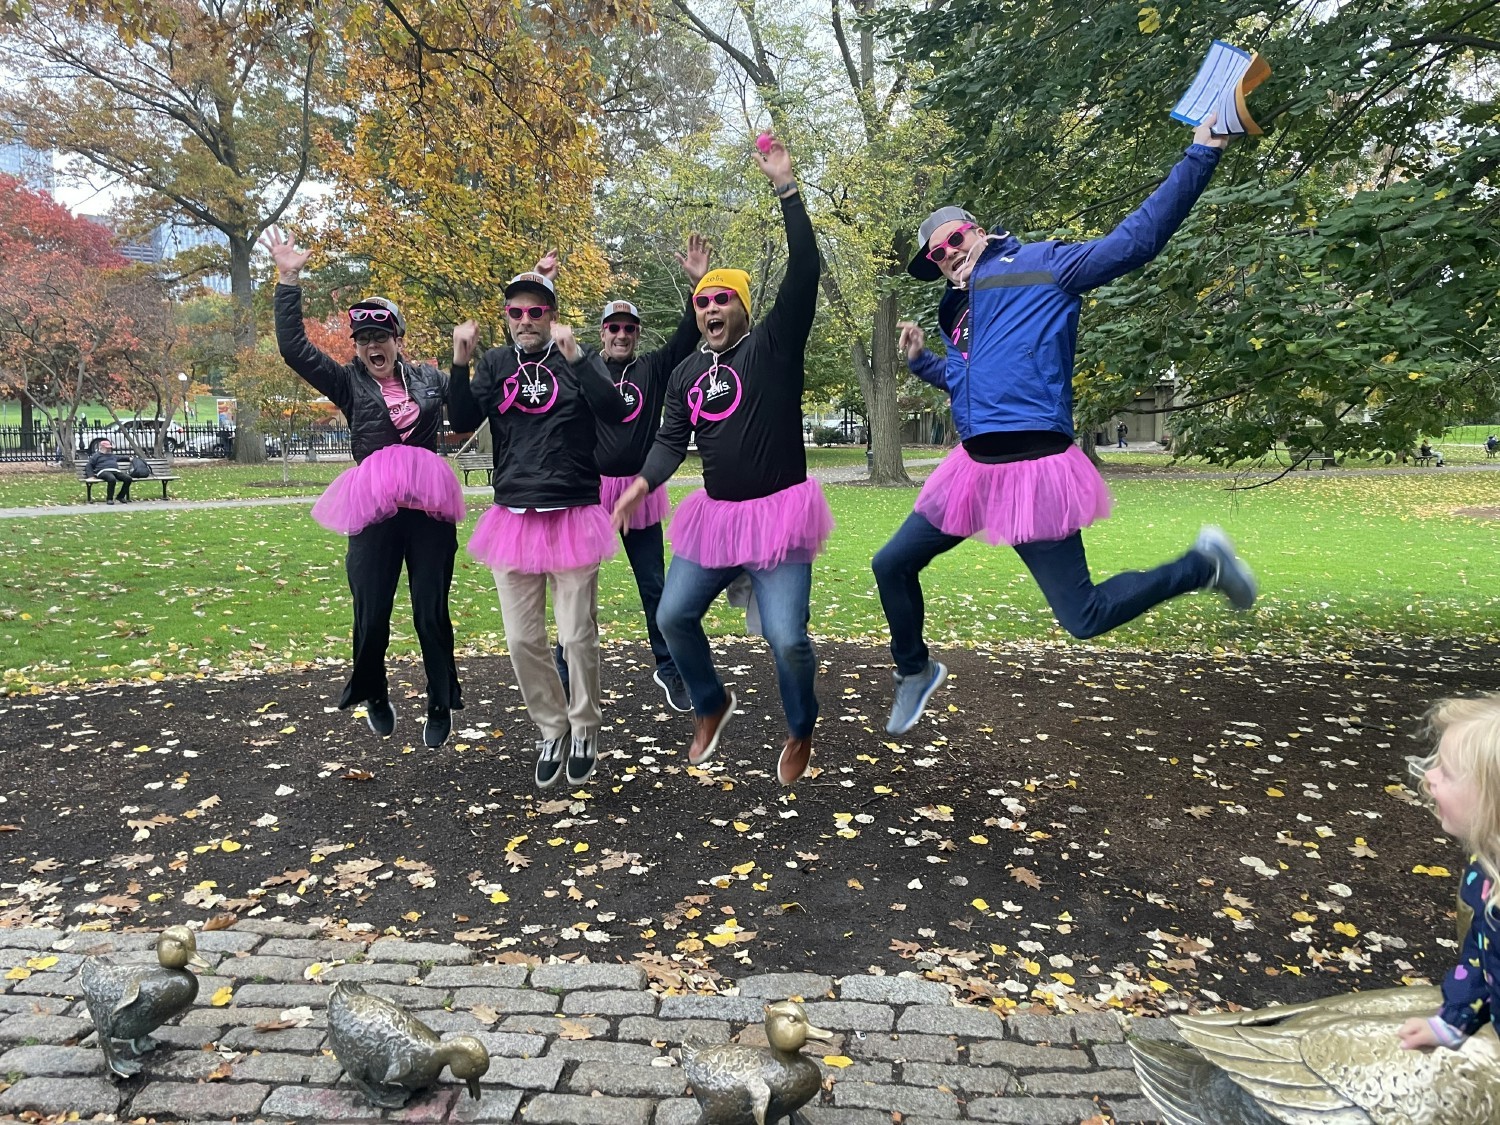 The Zelis team was so excited to support our Race for the Cure fundraiser!